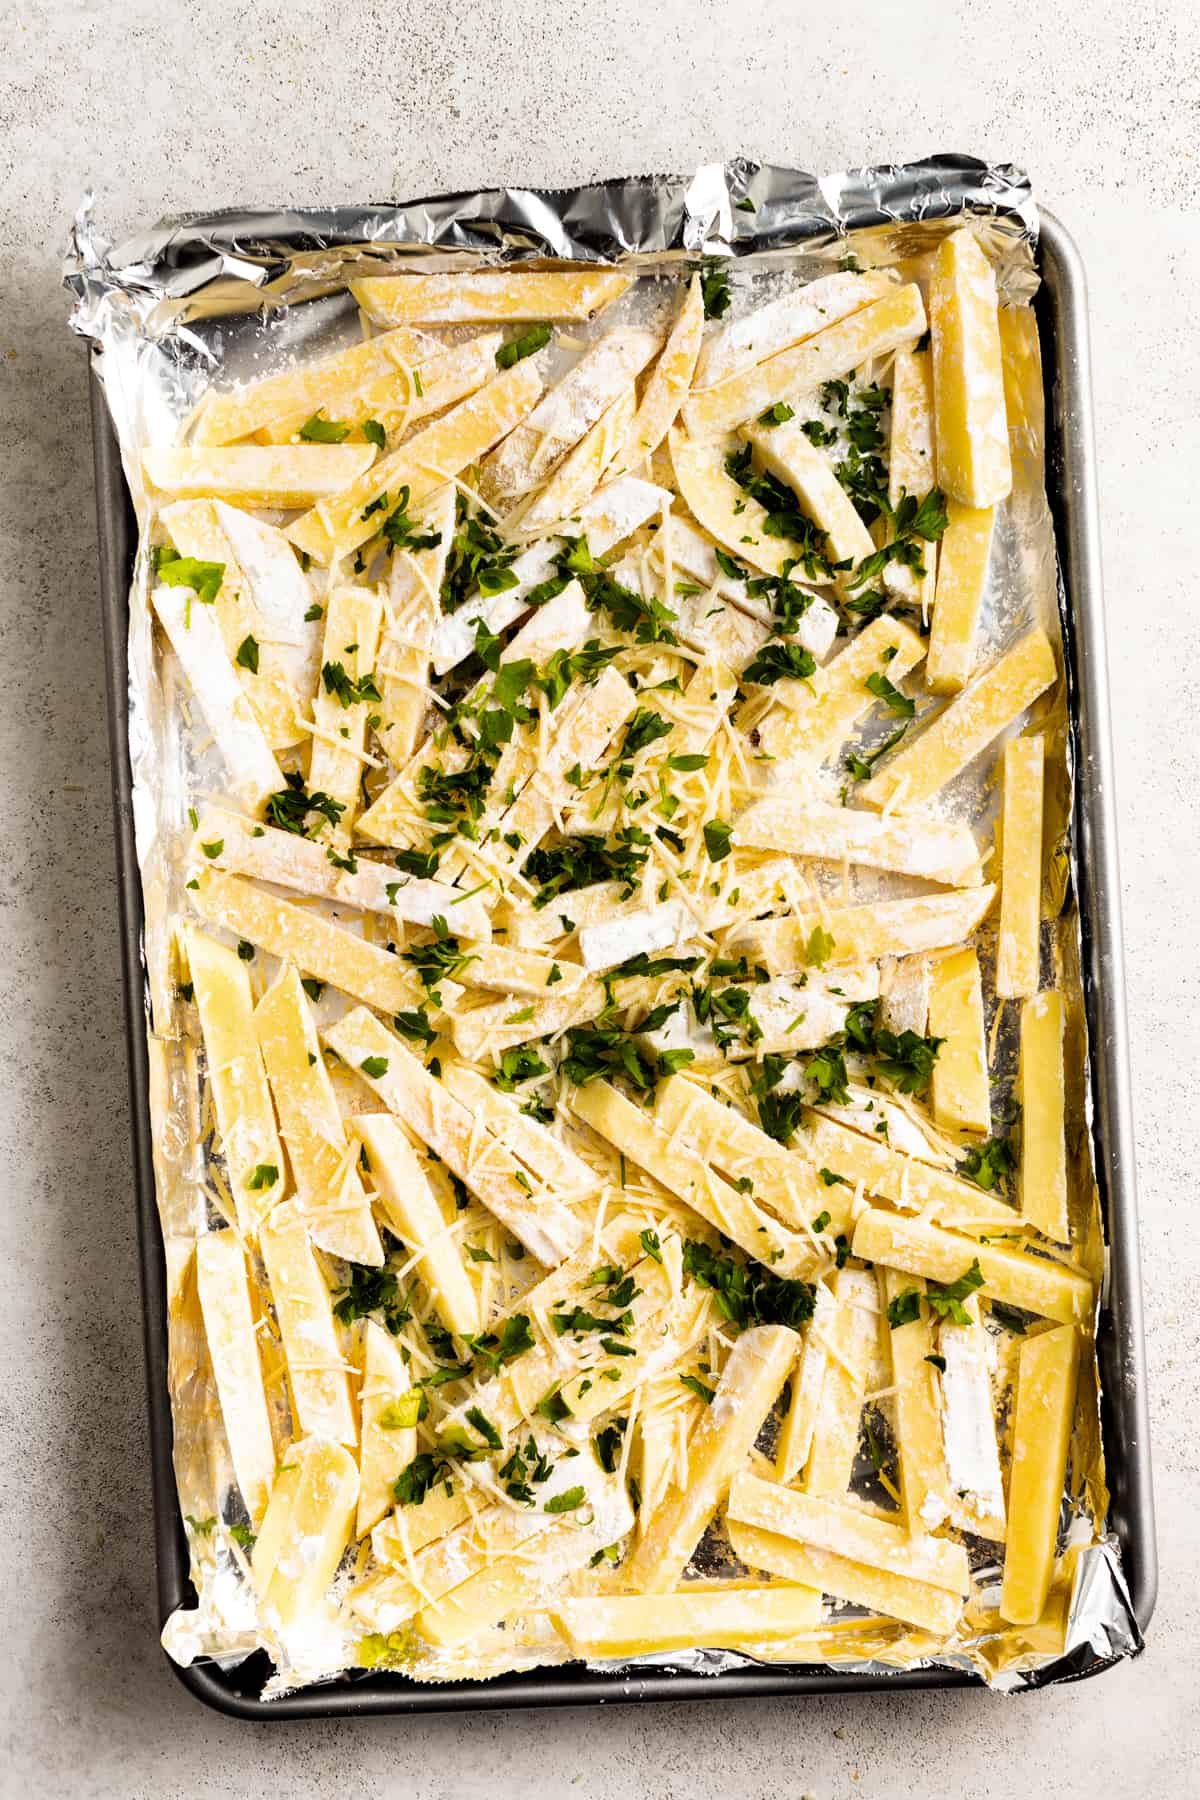 Potatoes are cut into fries, topped with fresh chopped parsley, and arranged on a baking sheet.